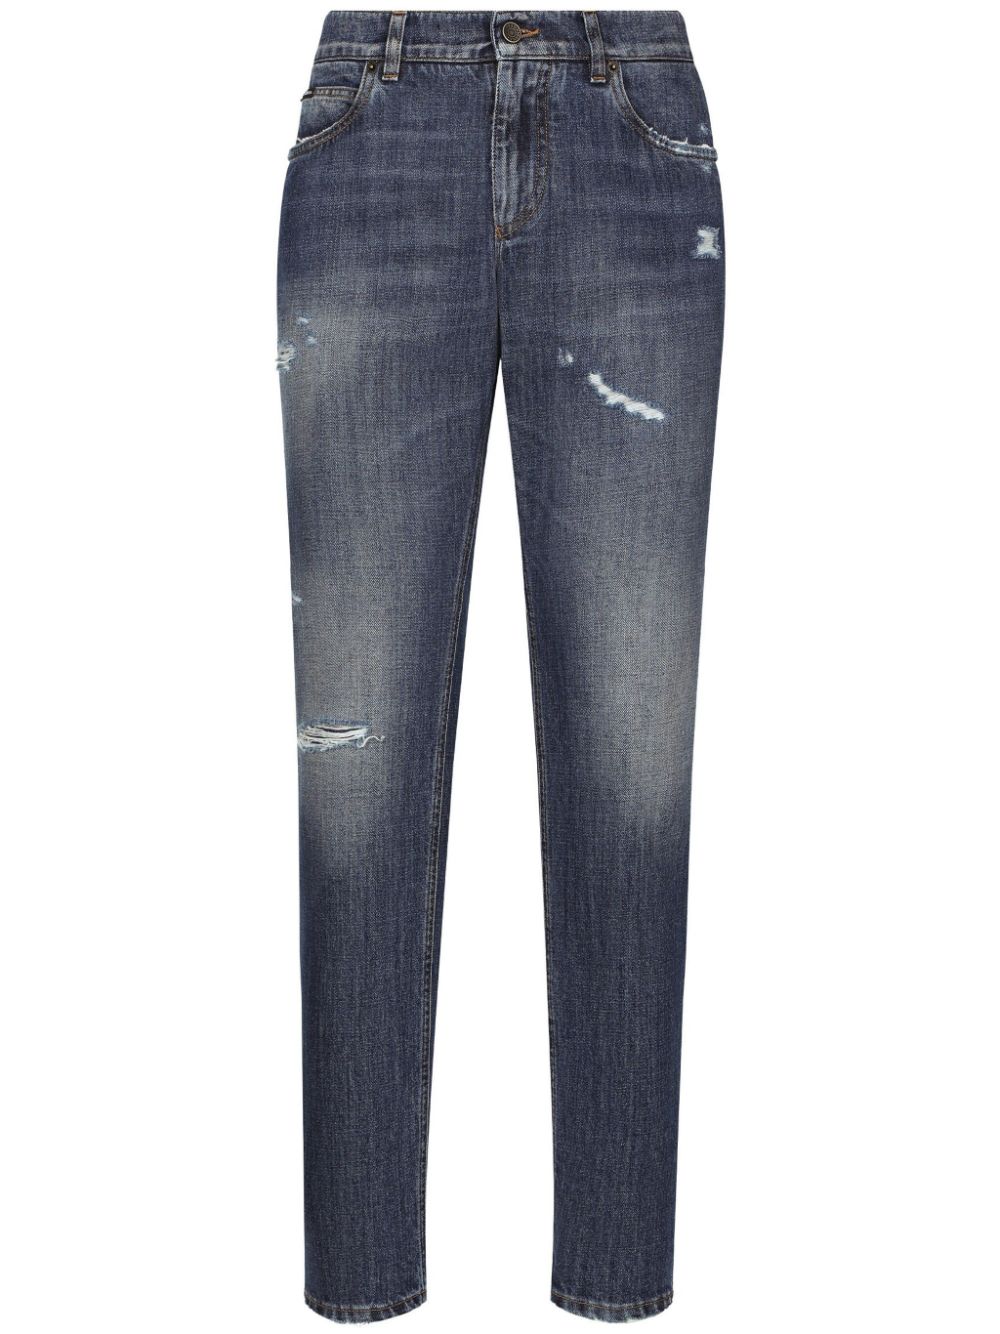 Distressed finish jeans